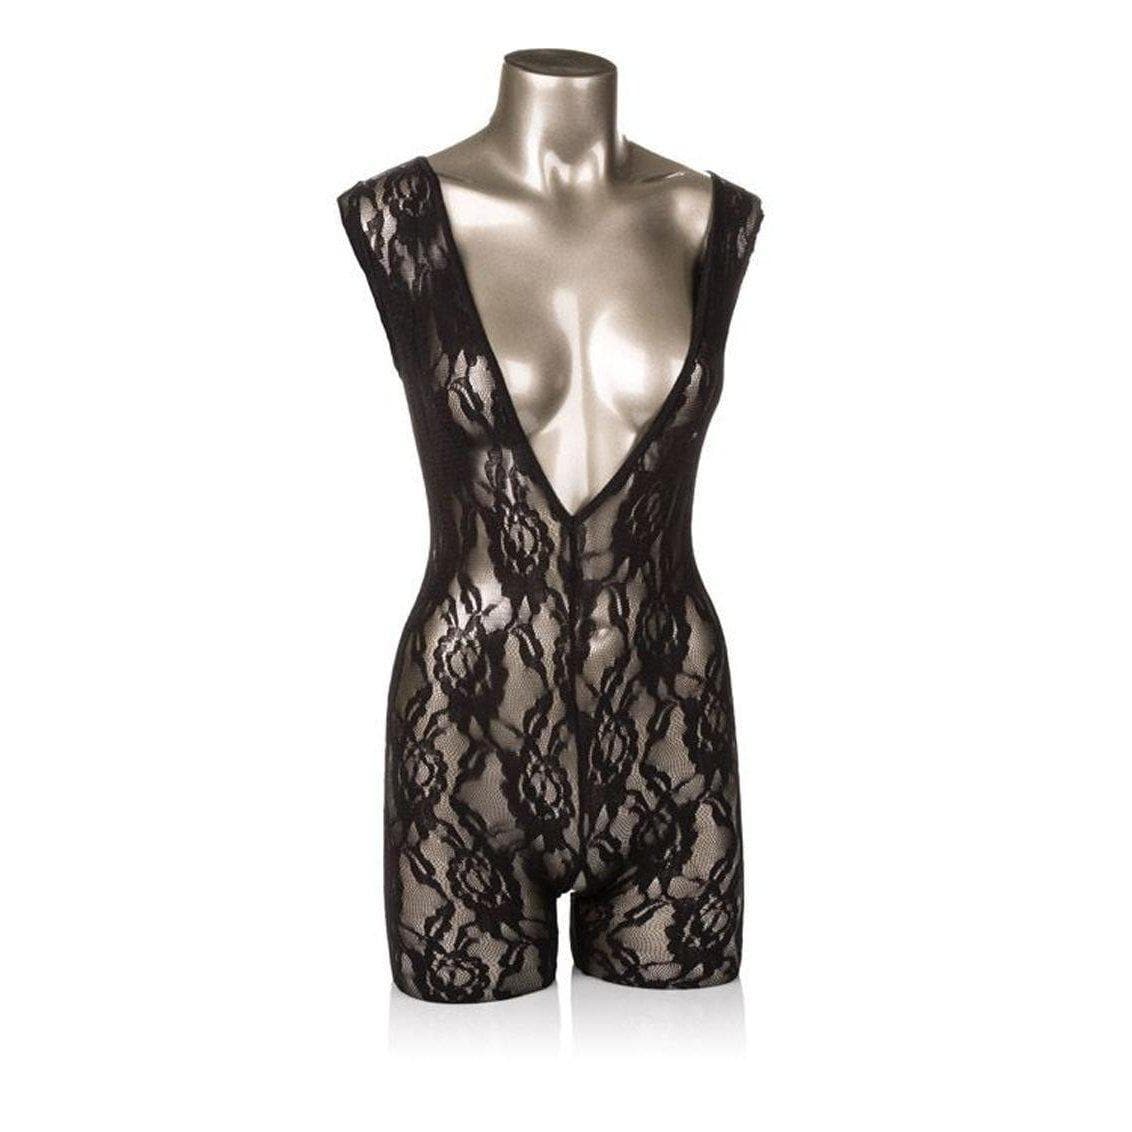 Scandal Lace Stretchy Crotchless Body Suit with Plunging V Neck Black - Romantic Blessings